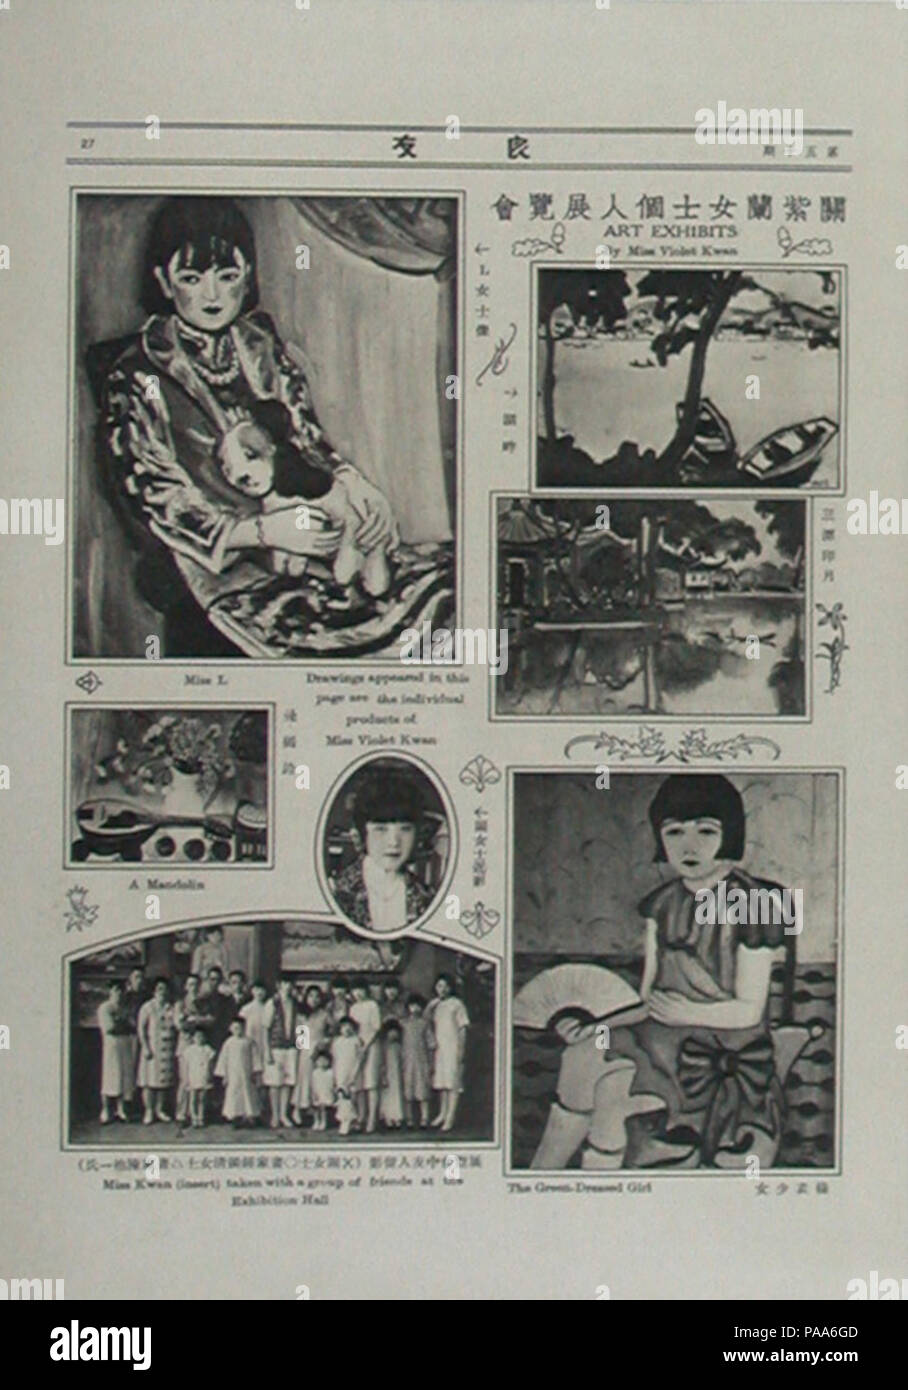 158 Liangyou magazine Number 57 Special Exhibition of Ms. Guan Zilan in 1930 Stock Photo